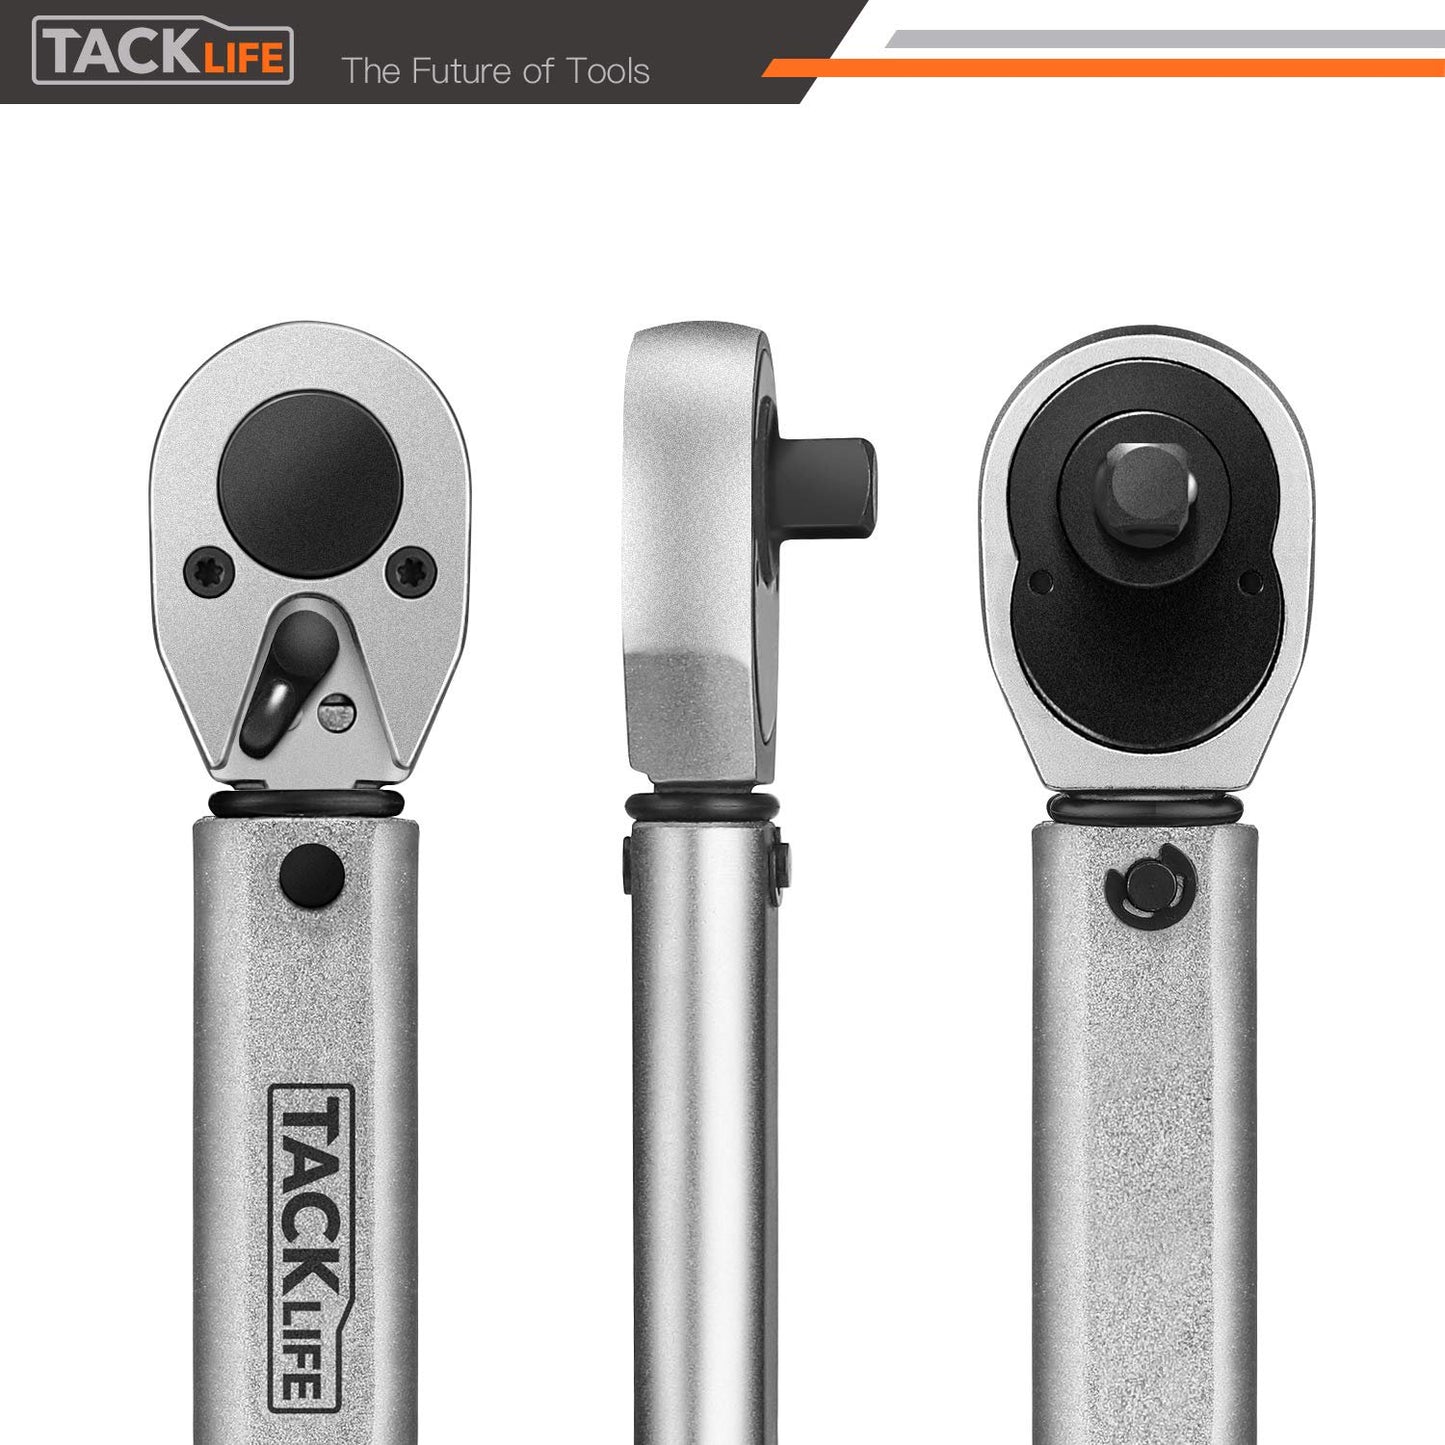 Tacklife 3/8" Drive Click Torque Wrench Set, With 1/2" & 1/4" Adapters And An Extension Bar (10-80 ft.-lb./13.6-108.5 Nm) - HTW1A